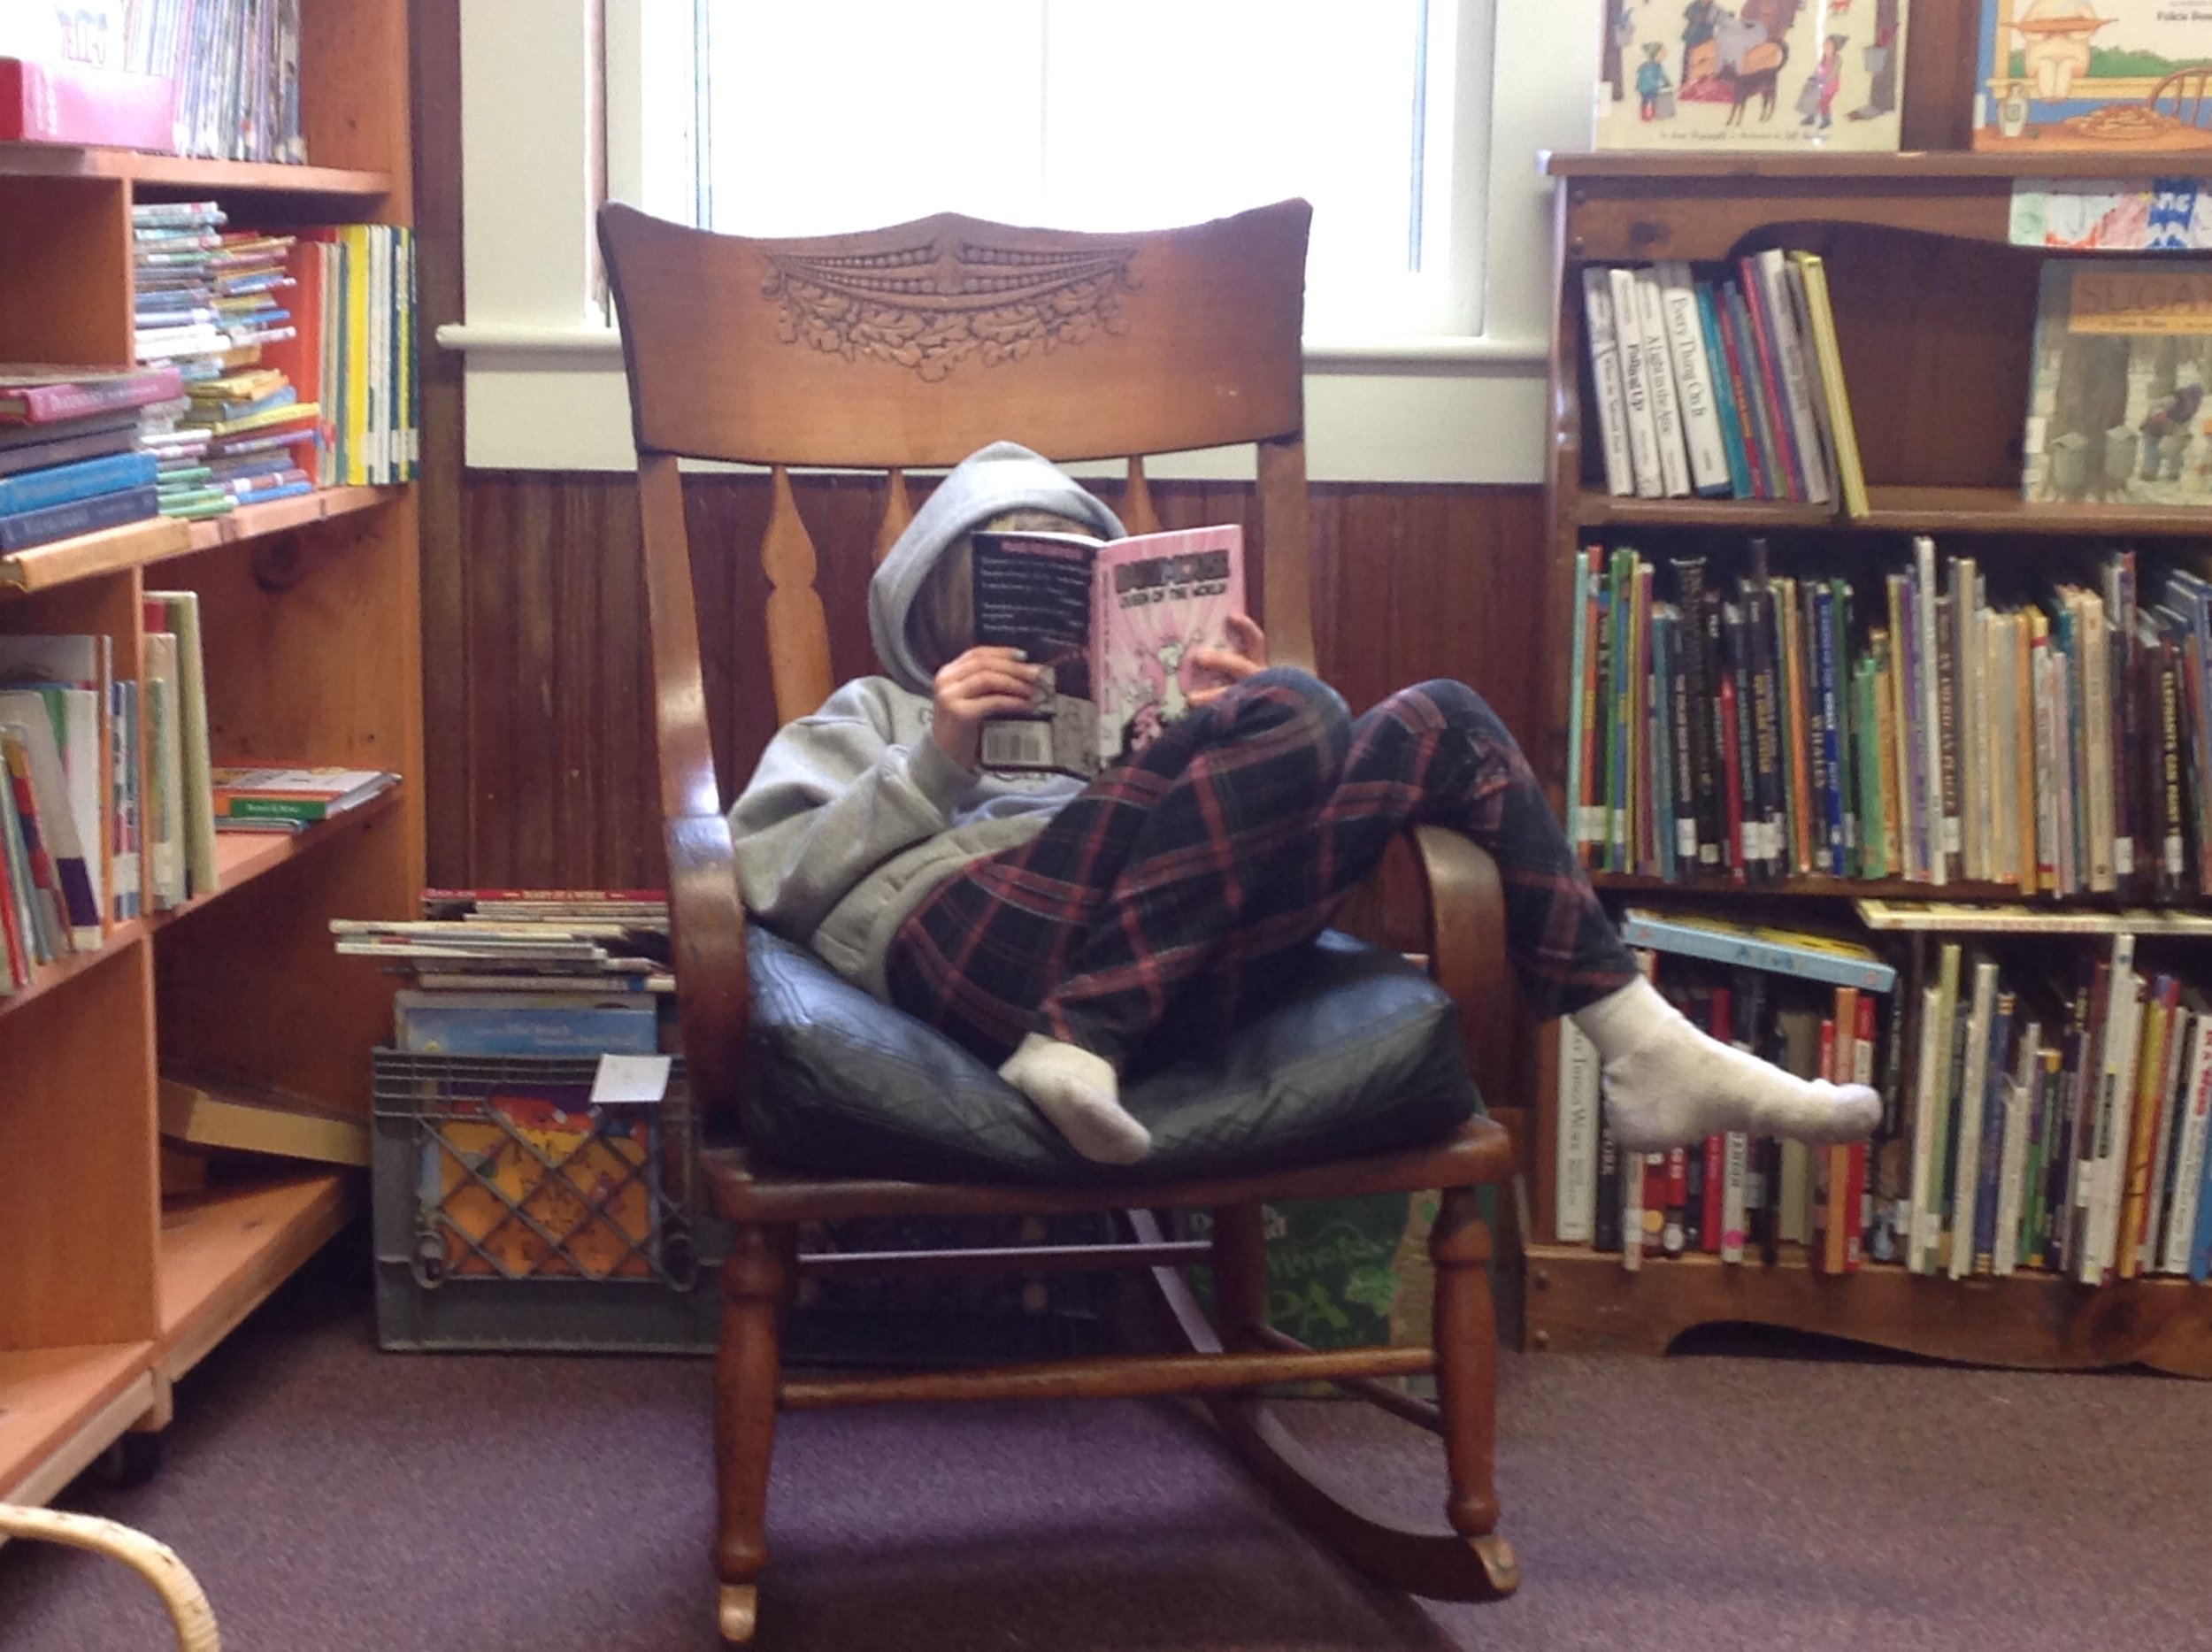 A patron, reading her book in our cozy library seting.